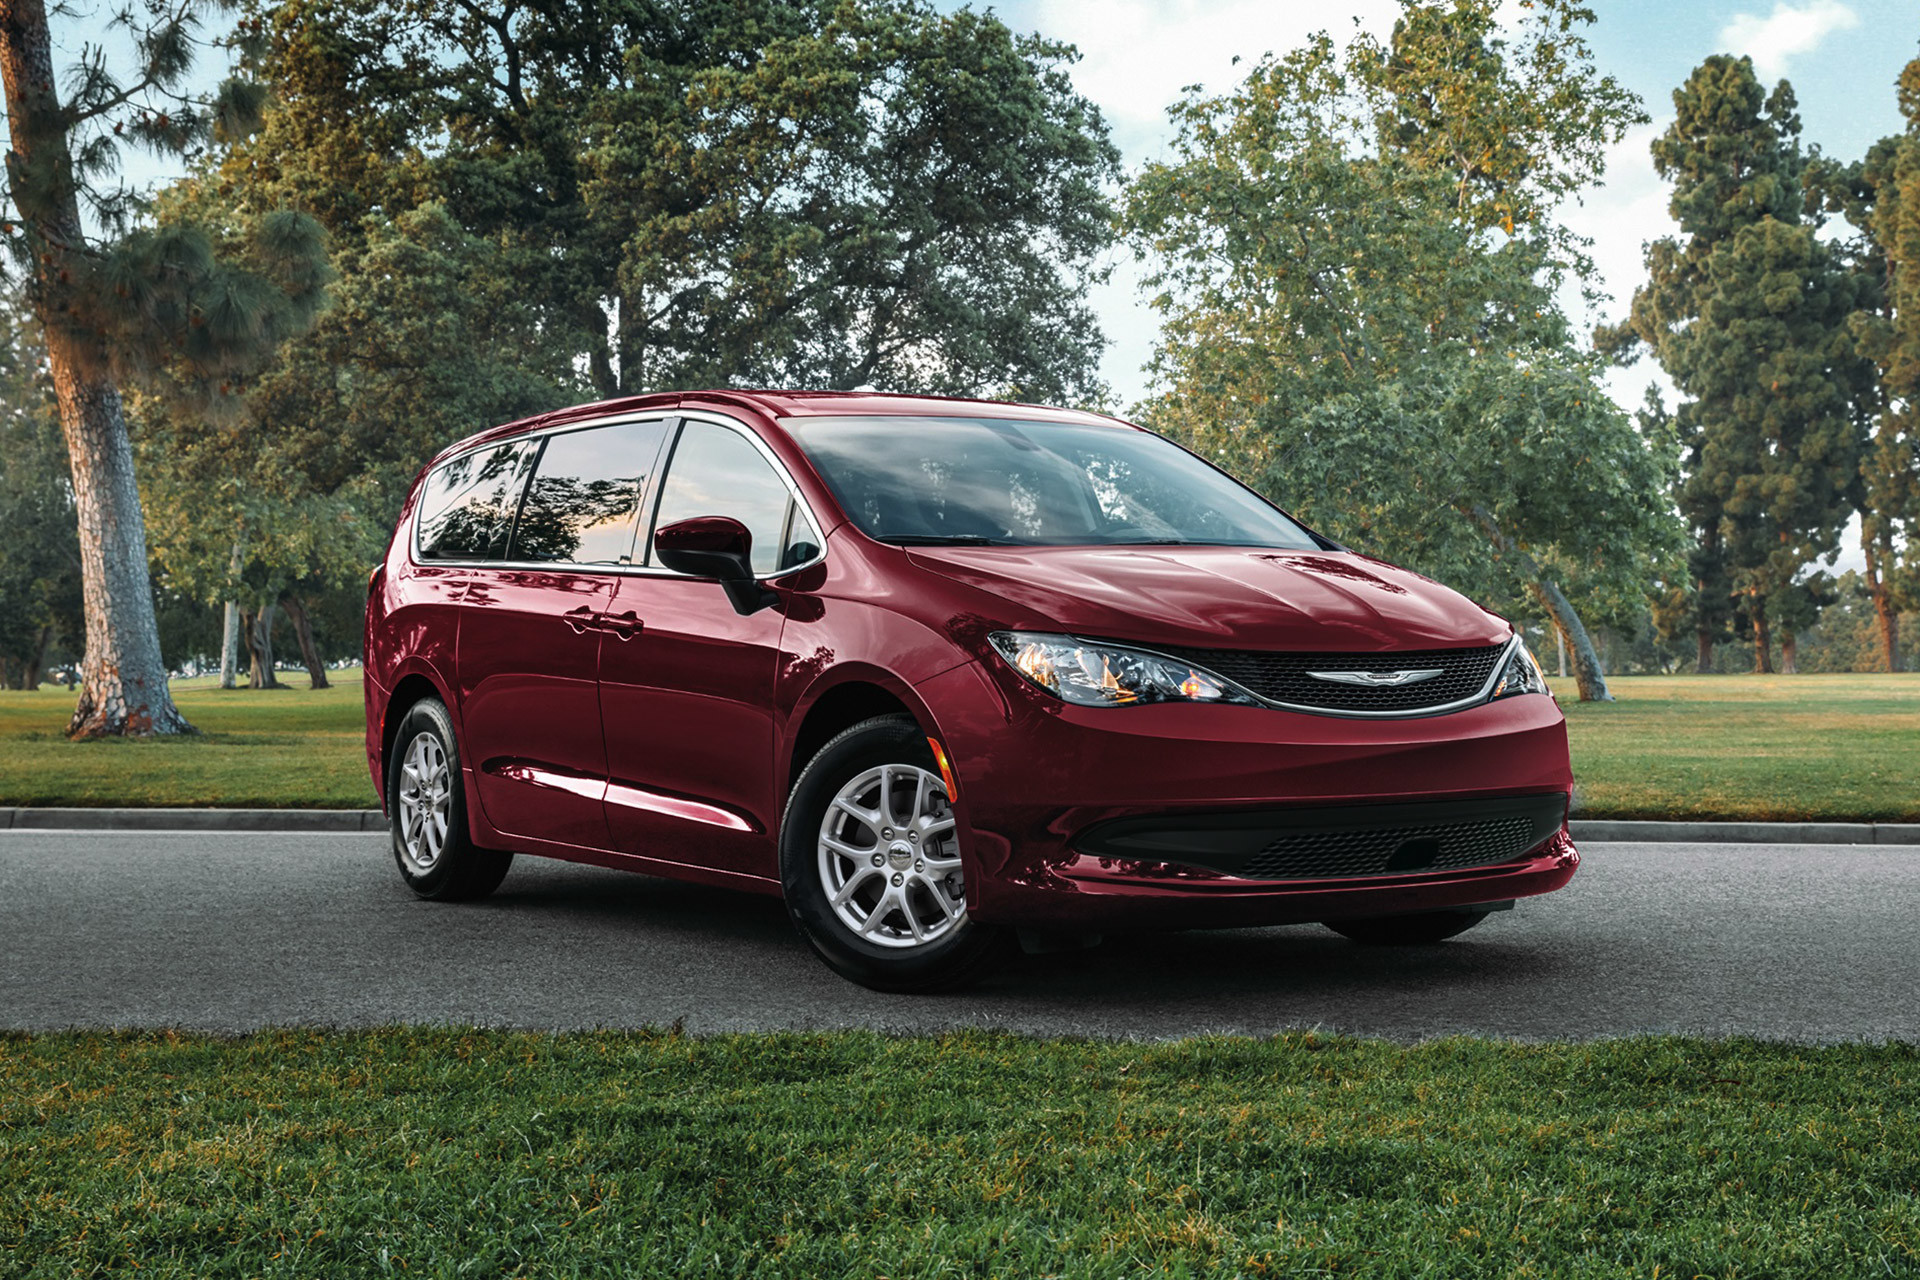 A three-quarters view of a Velvet Red Pearl 2021 Chrysler Grand Caravan parked on a road with a forest in the background.